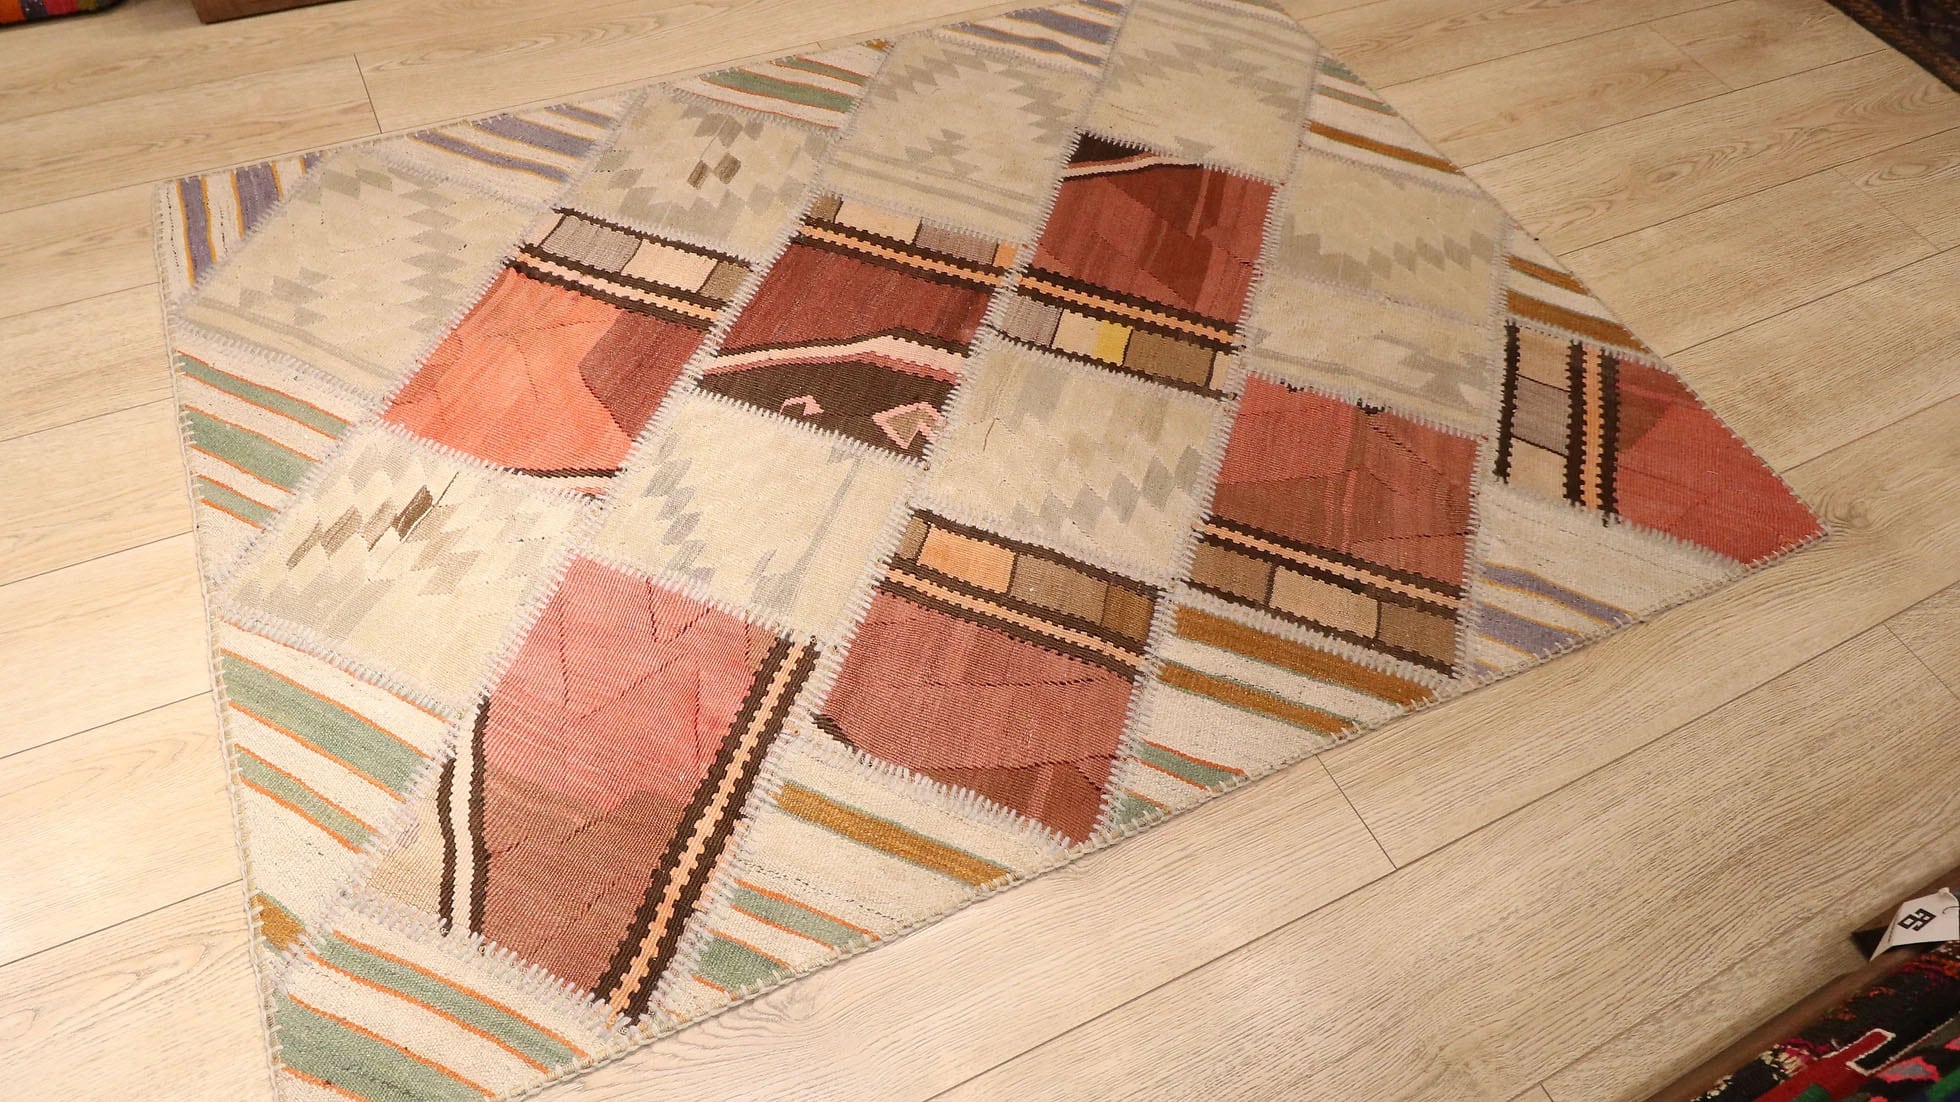 neutral patchwork flat-weave rug in rustic earth tones by Kilim Couture in Manhattan